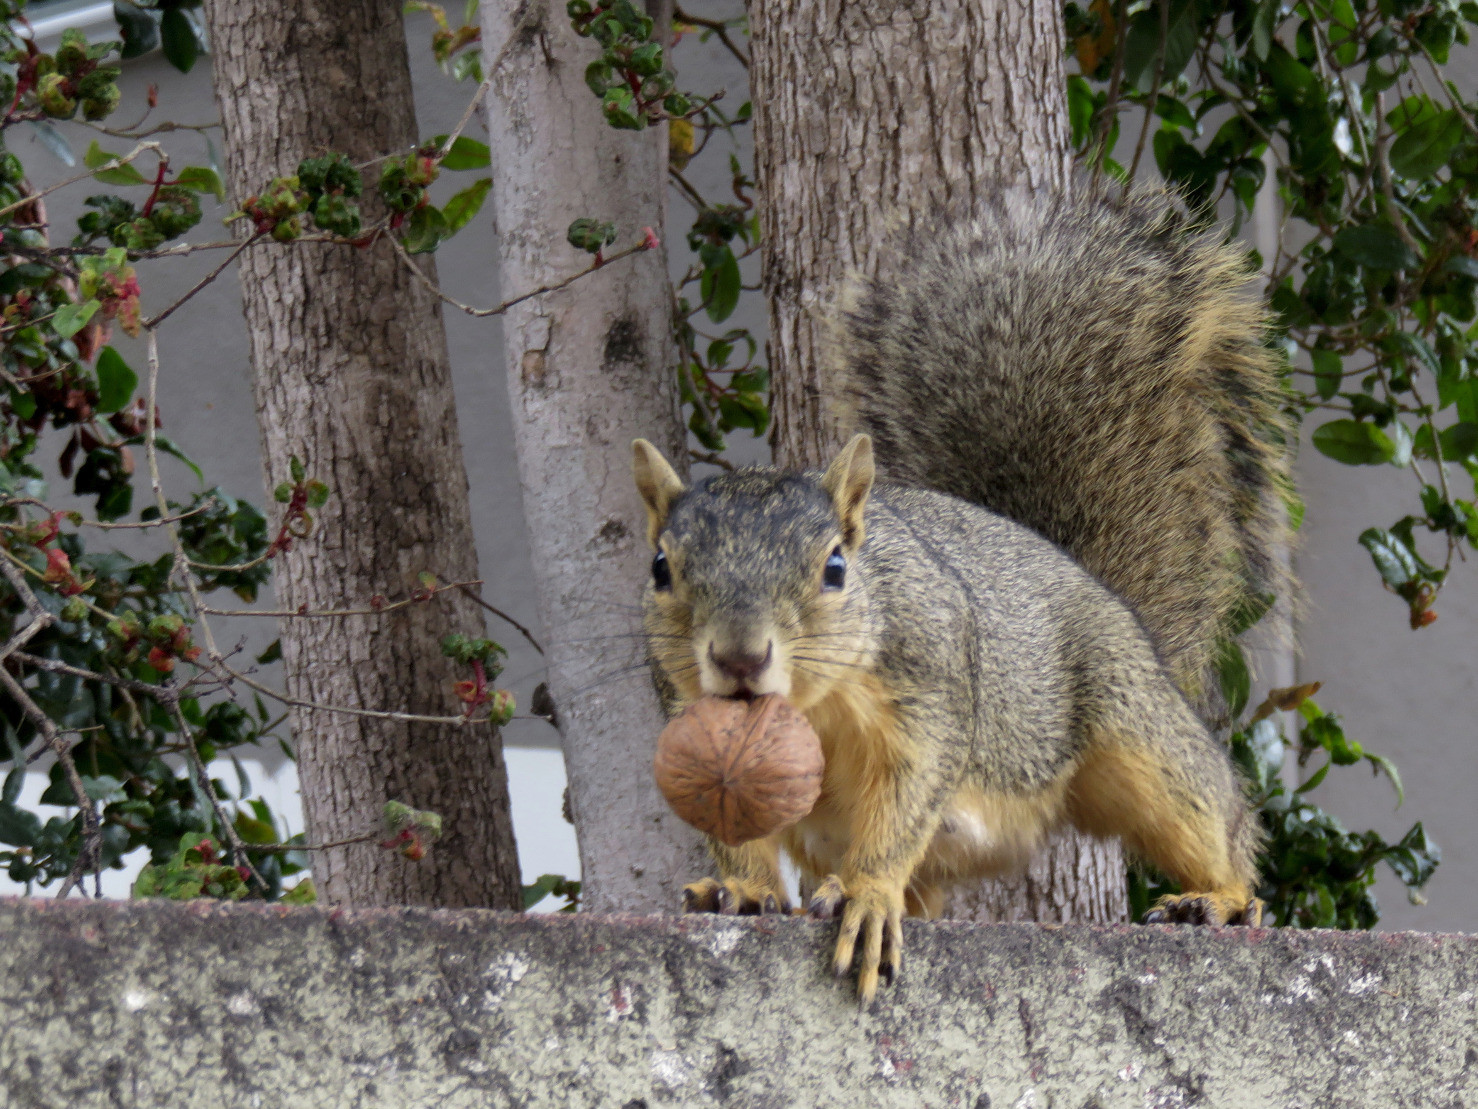 Squirrel with a walnut in its mouth.